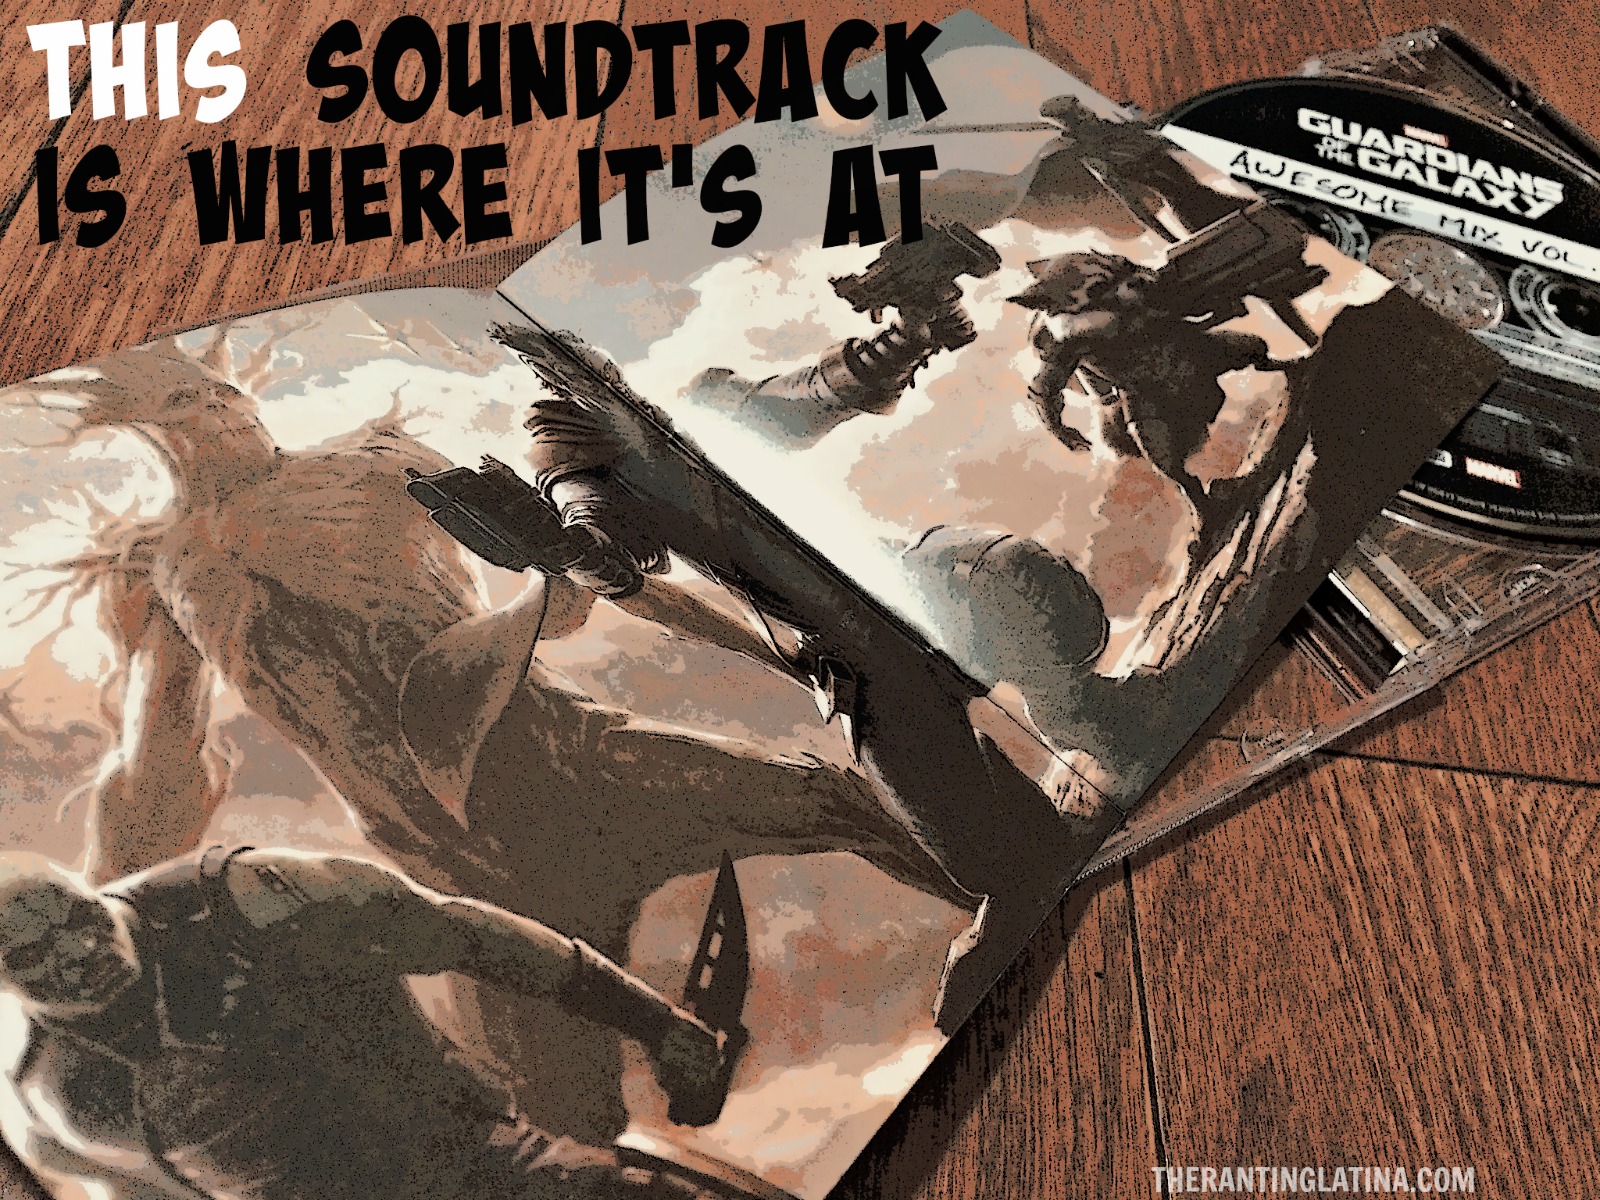 The Guardians Of The Galaxy Soundtrack Is Where It’s At (+ Gift Card!)